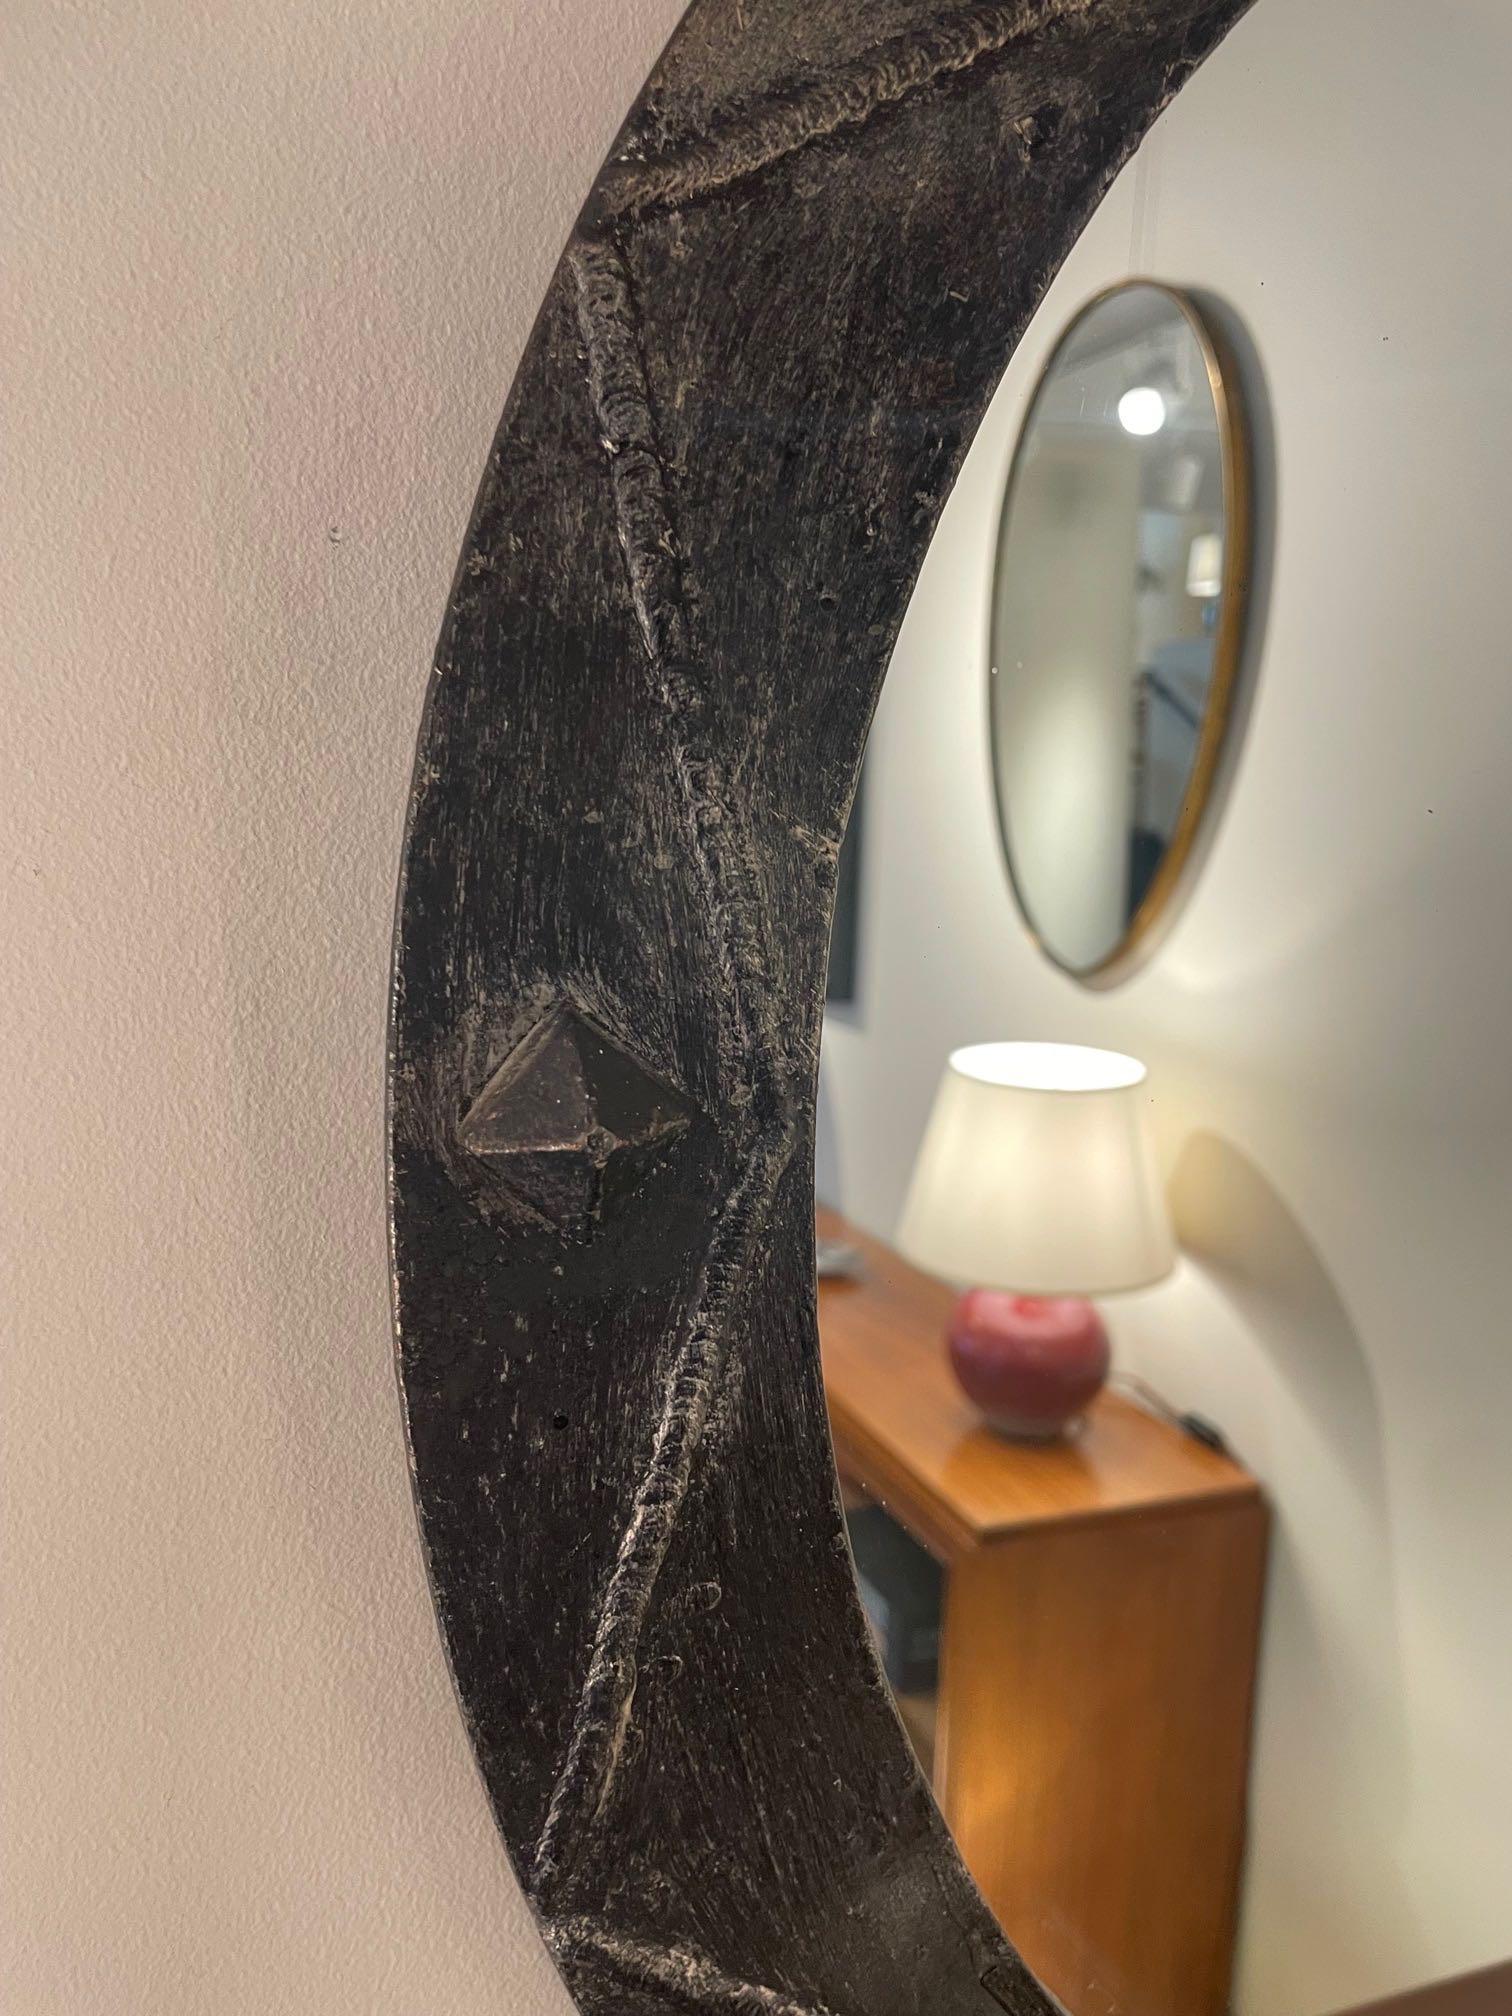 Spanish Steel Framed Mirror with Faux Leather Strap, Spain, 1950s